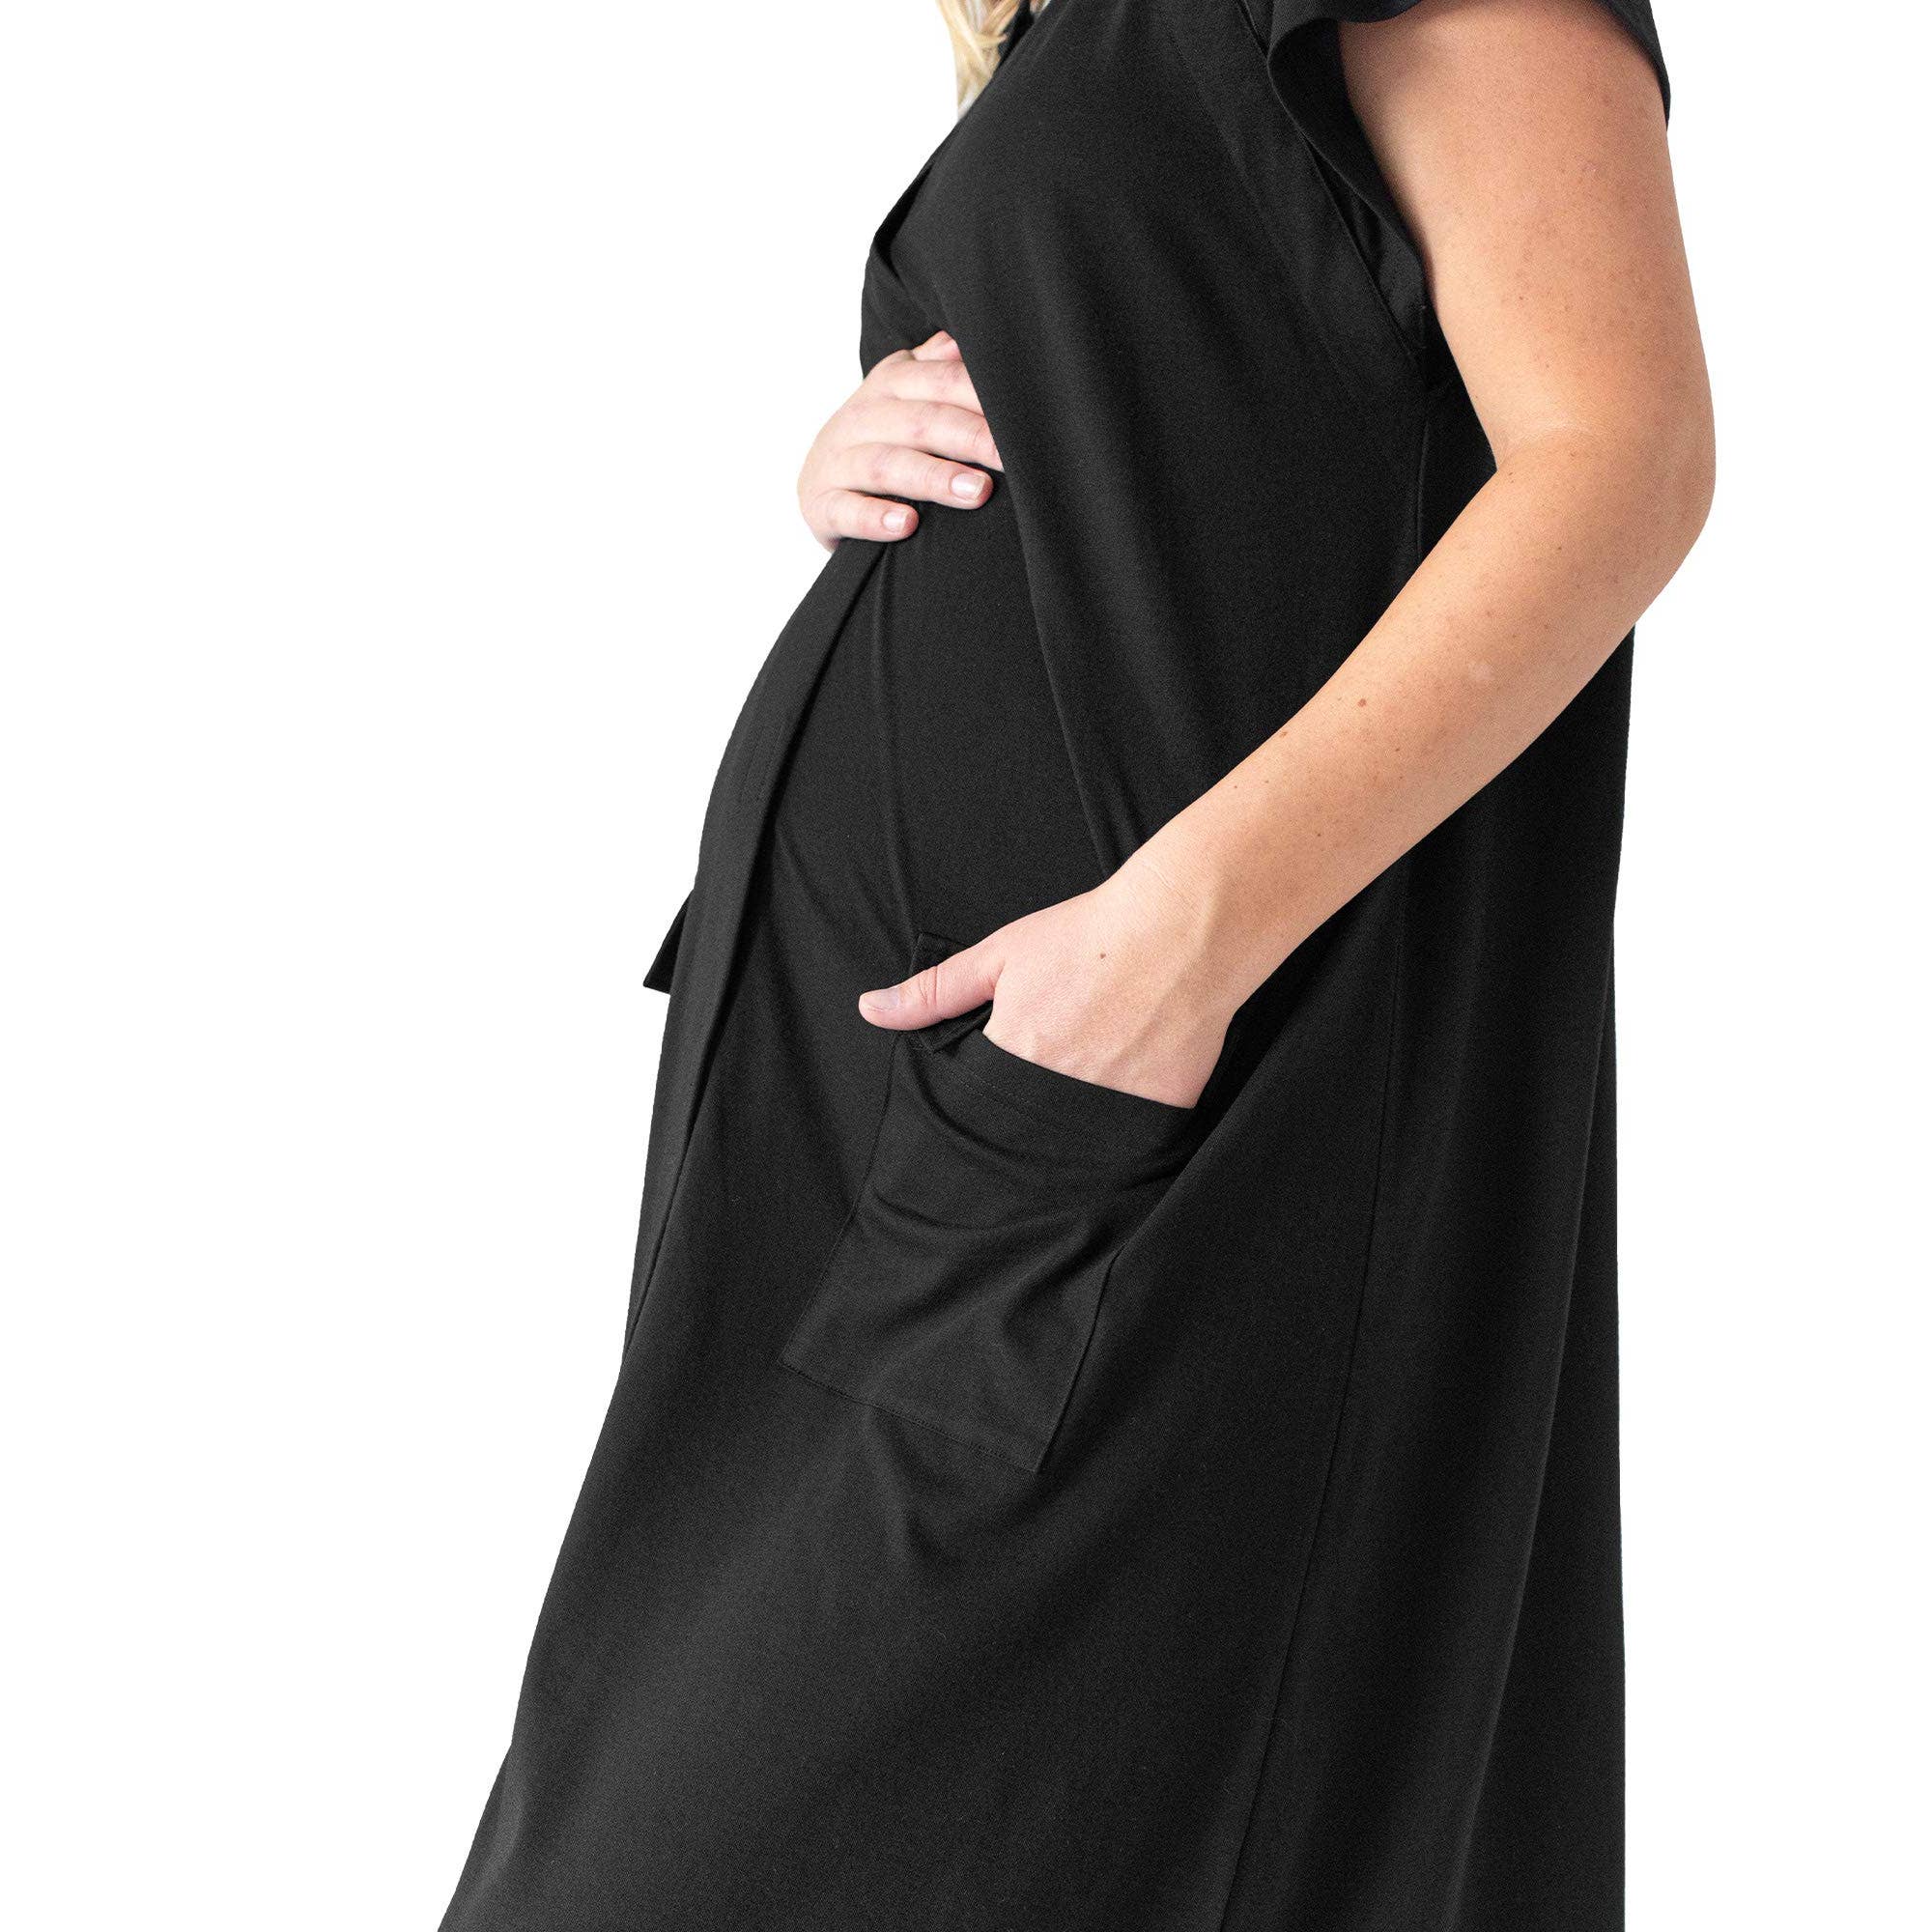 Kindred Bravely - Universal Labor and Delivery Gown In 1 Labor, Delivery- Black